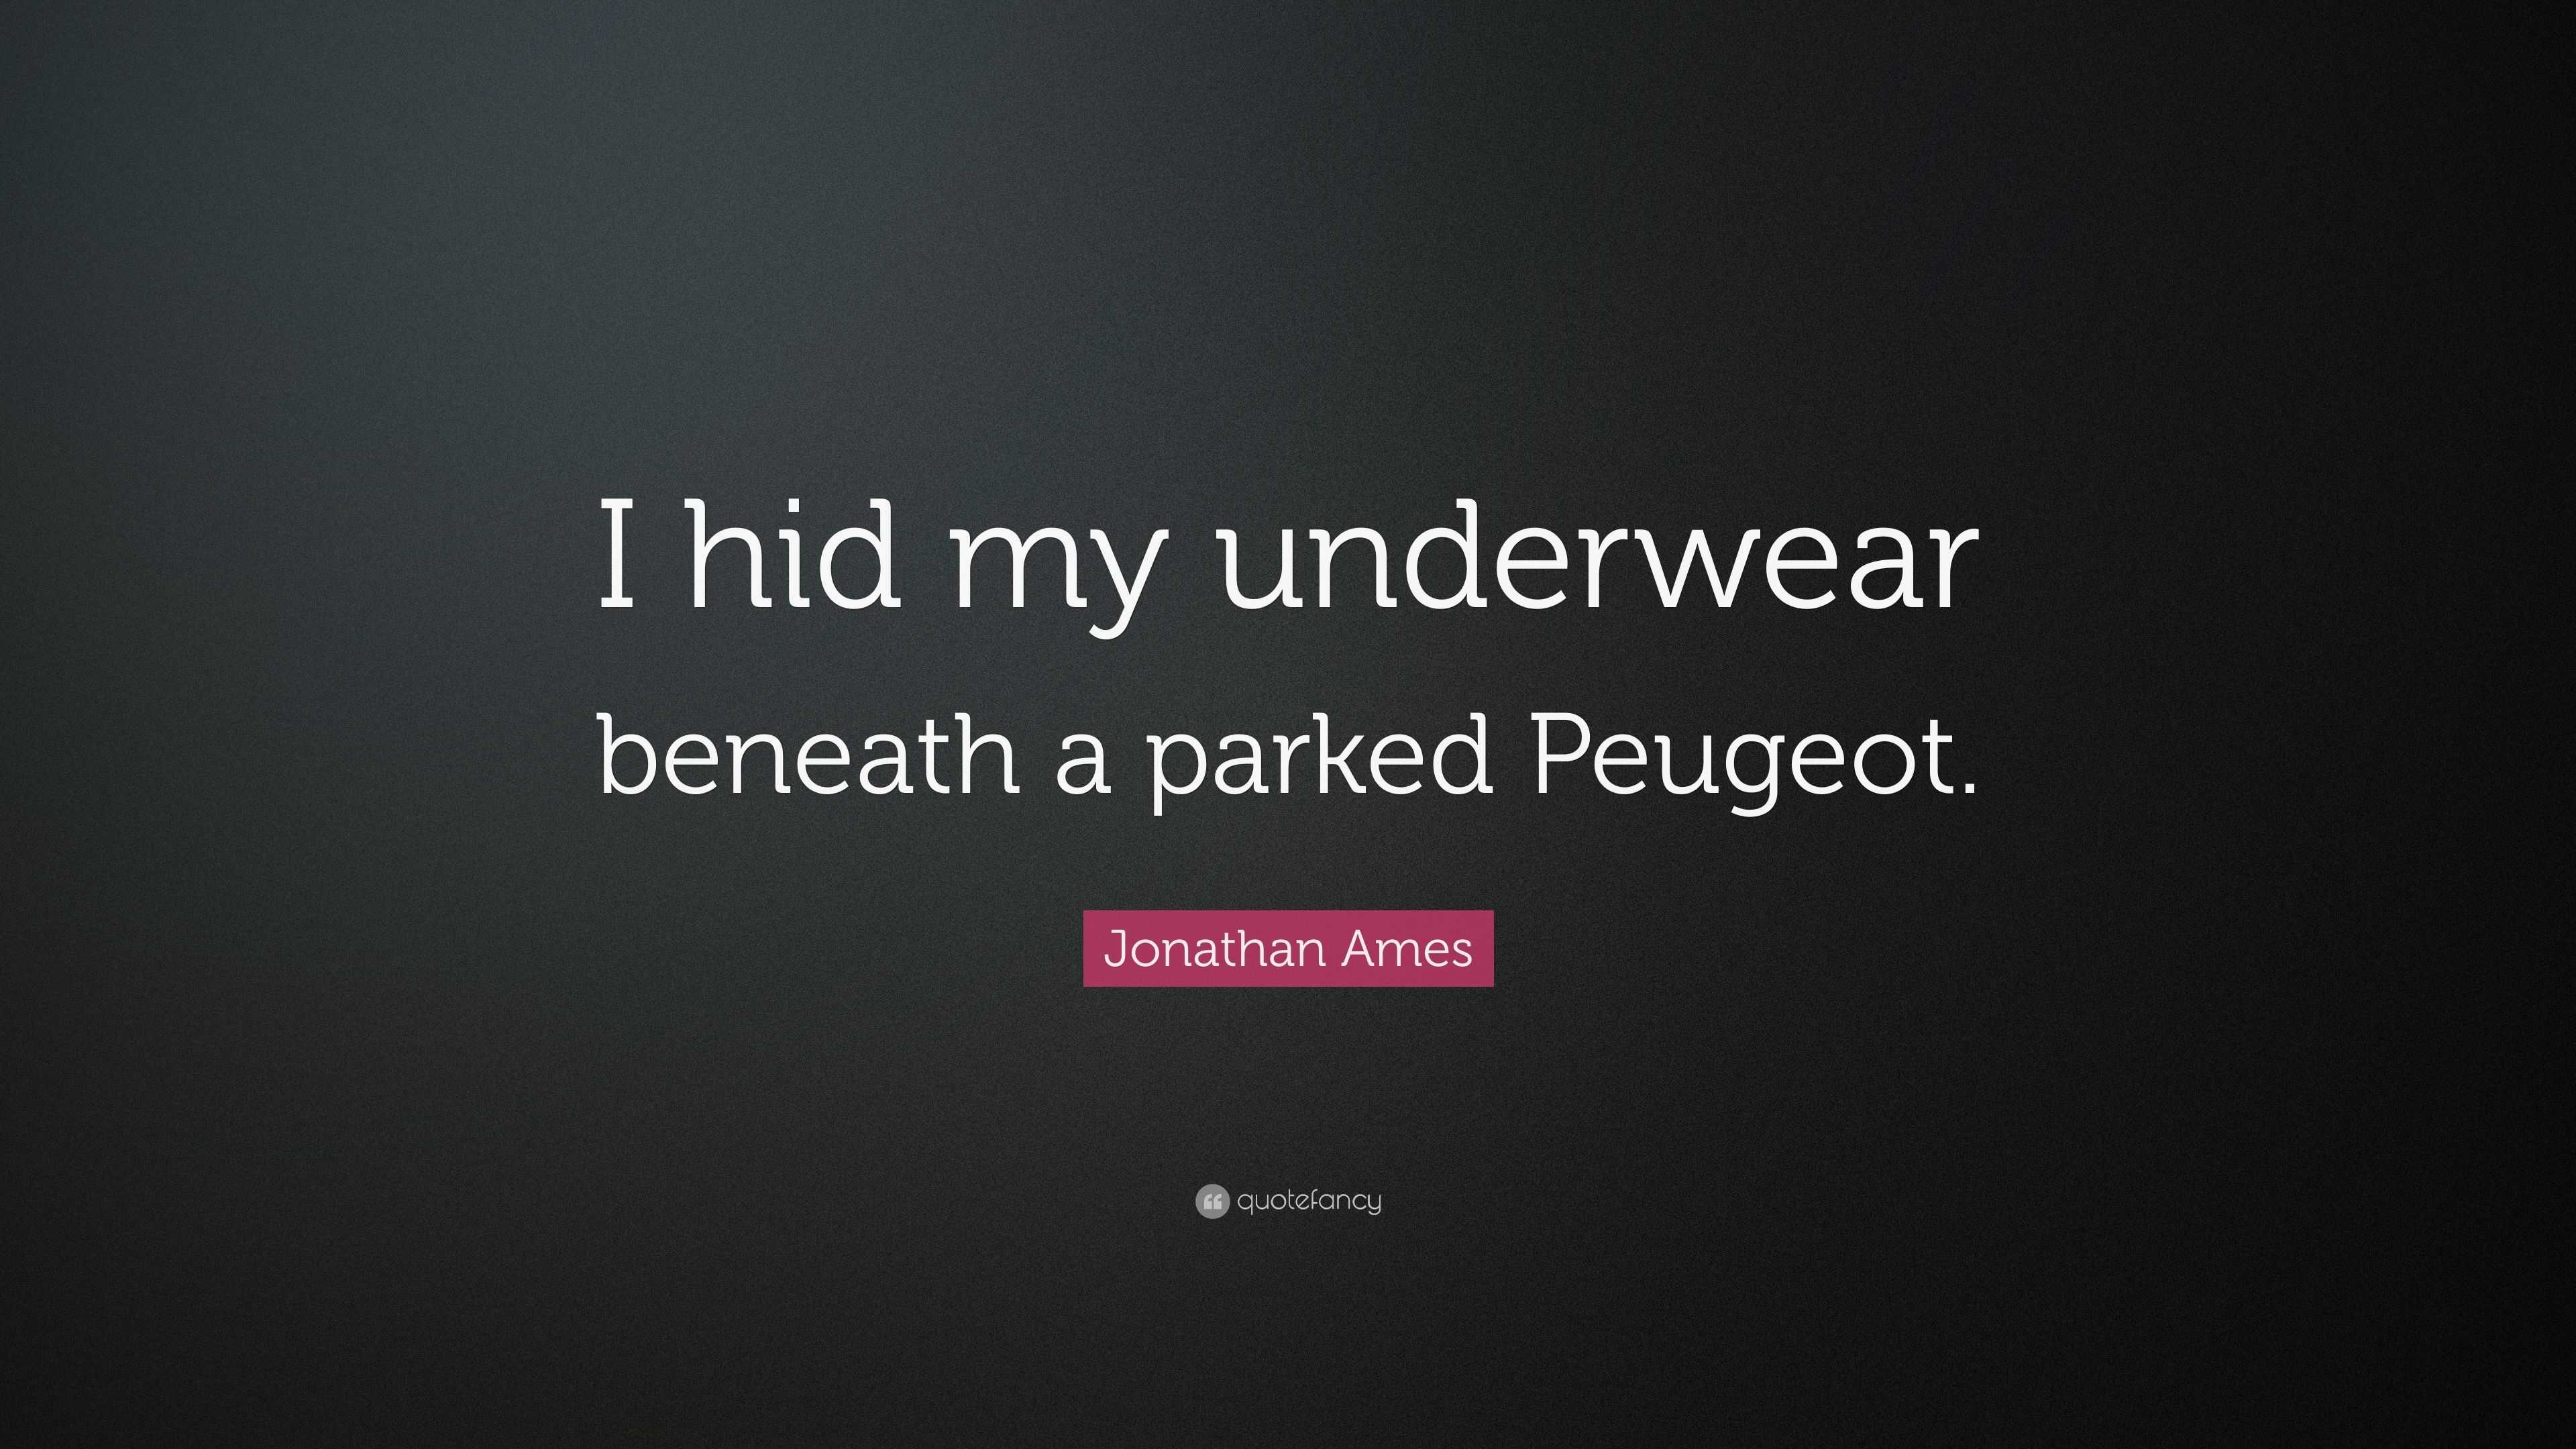 Jonathan Ames Quote: “I hid my underwear beneath a parked Peugeot.”